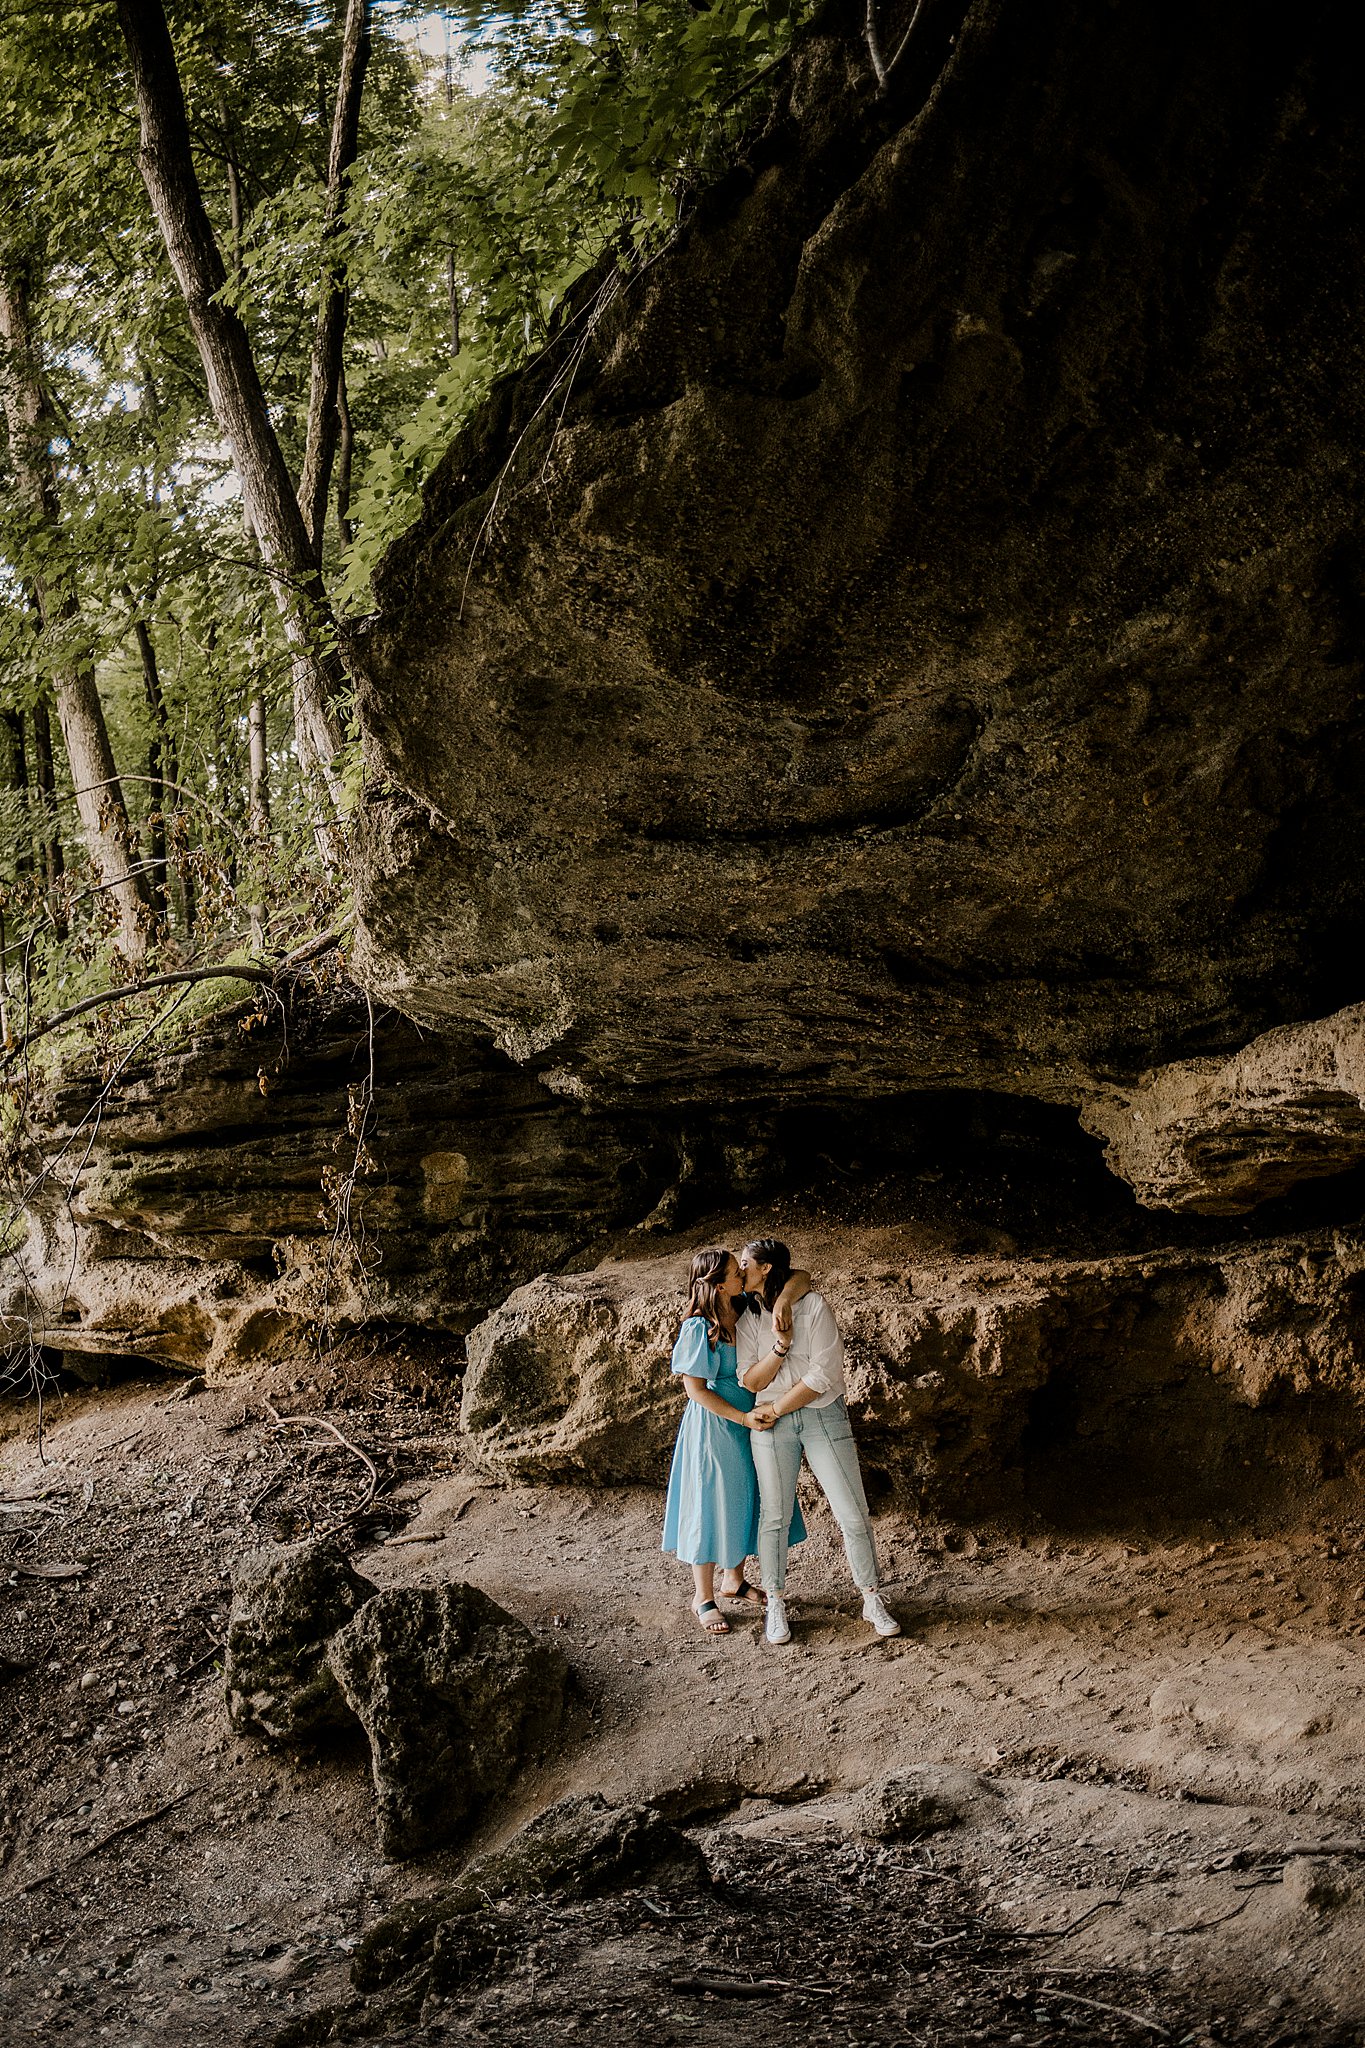 Samantha Mitchell, an LGBTQ Engagement photographer captures two women at Prophet's Rock in Indiana. The two women are snuggling together amongst large rocks. They are laughing and smiling at one another.